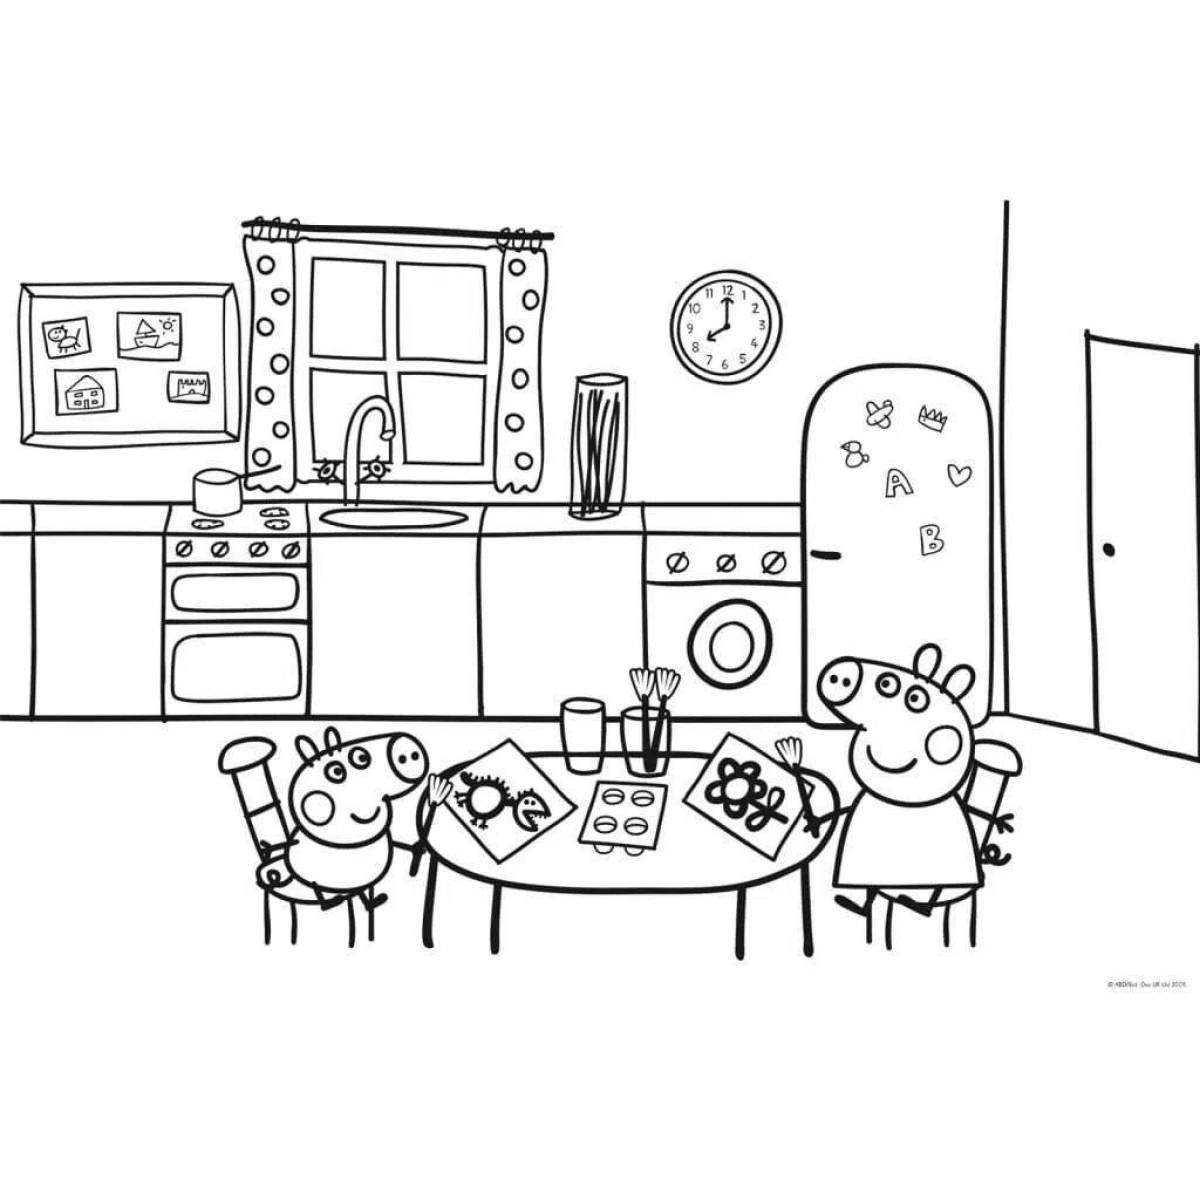 Exciting room coloring page